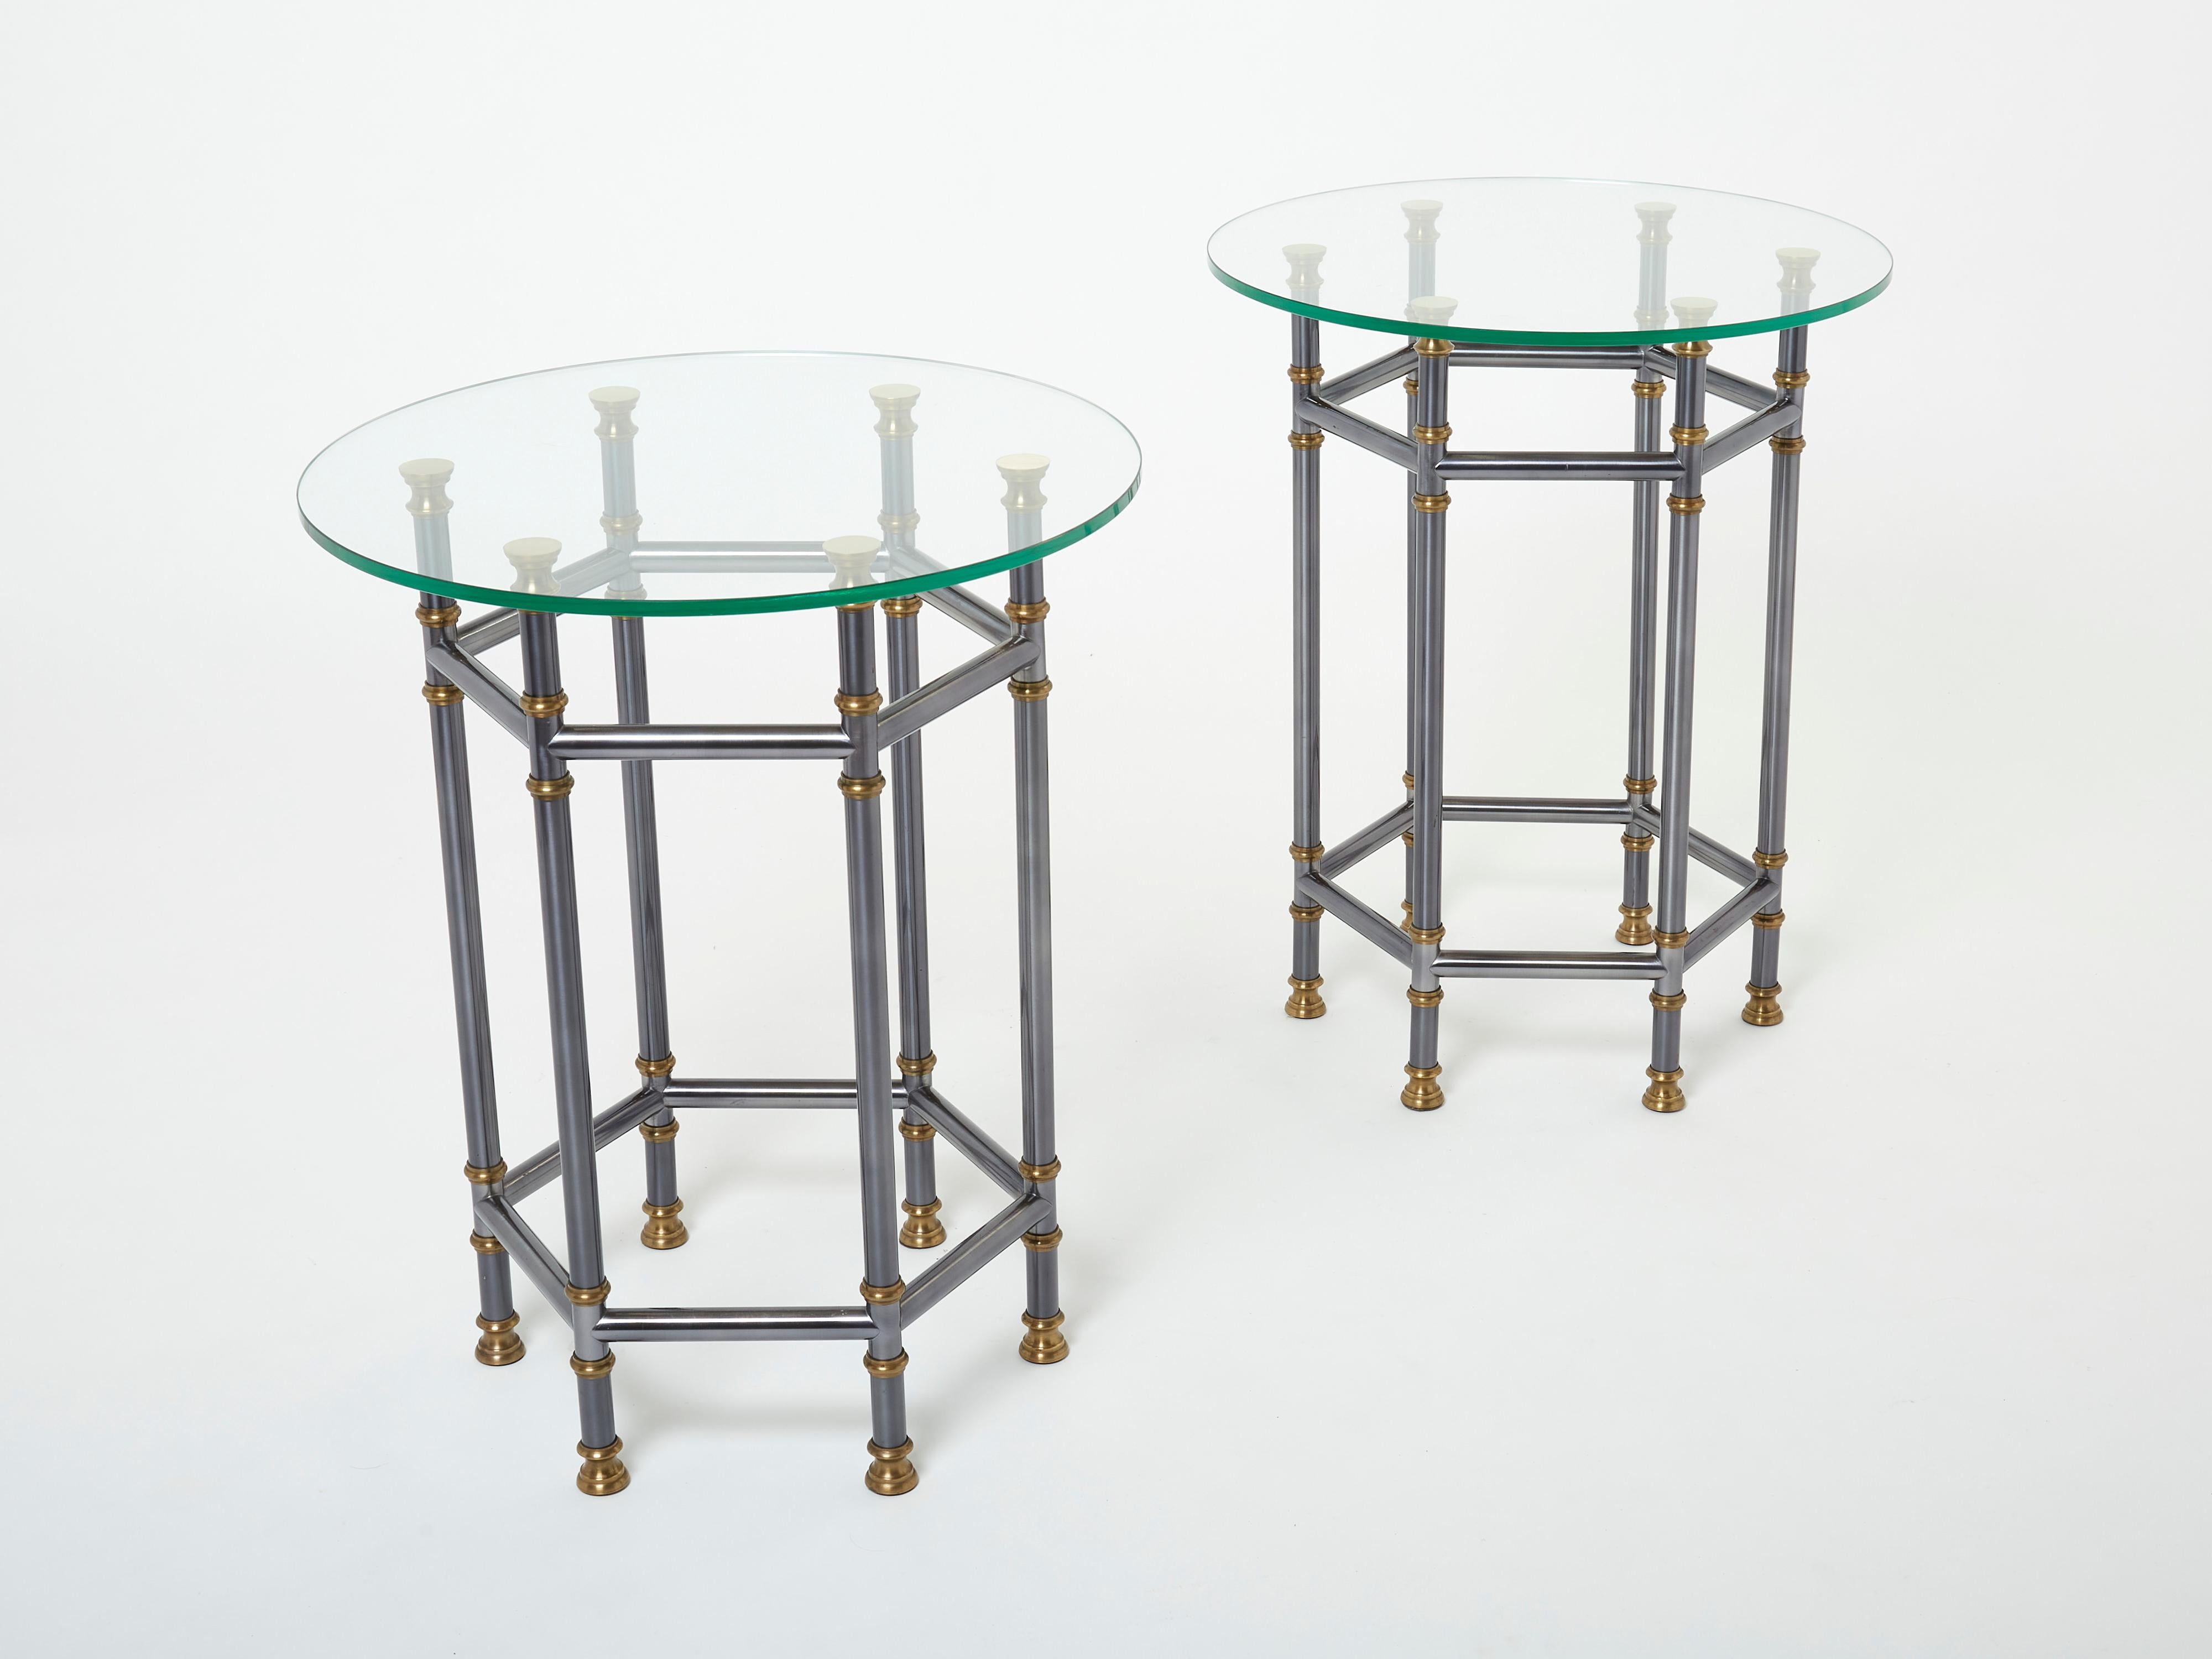 These beautiful gueridon side tables by Maison Jansen were created with typical French neoclassical style gunmetal and solid brass mix in the early 1970s. The thick round glass top is finishing the pair smoothly. Their sophisticated design is